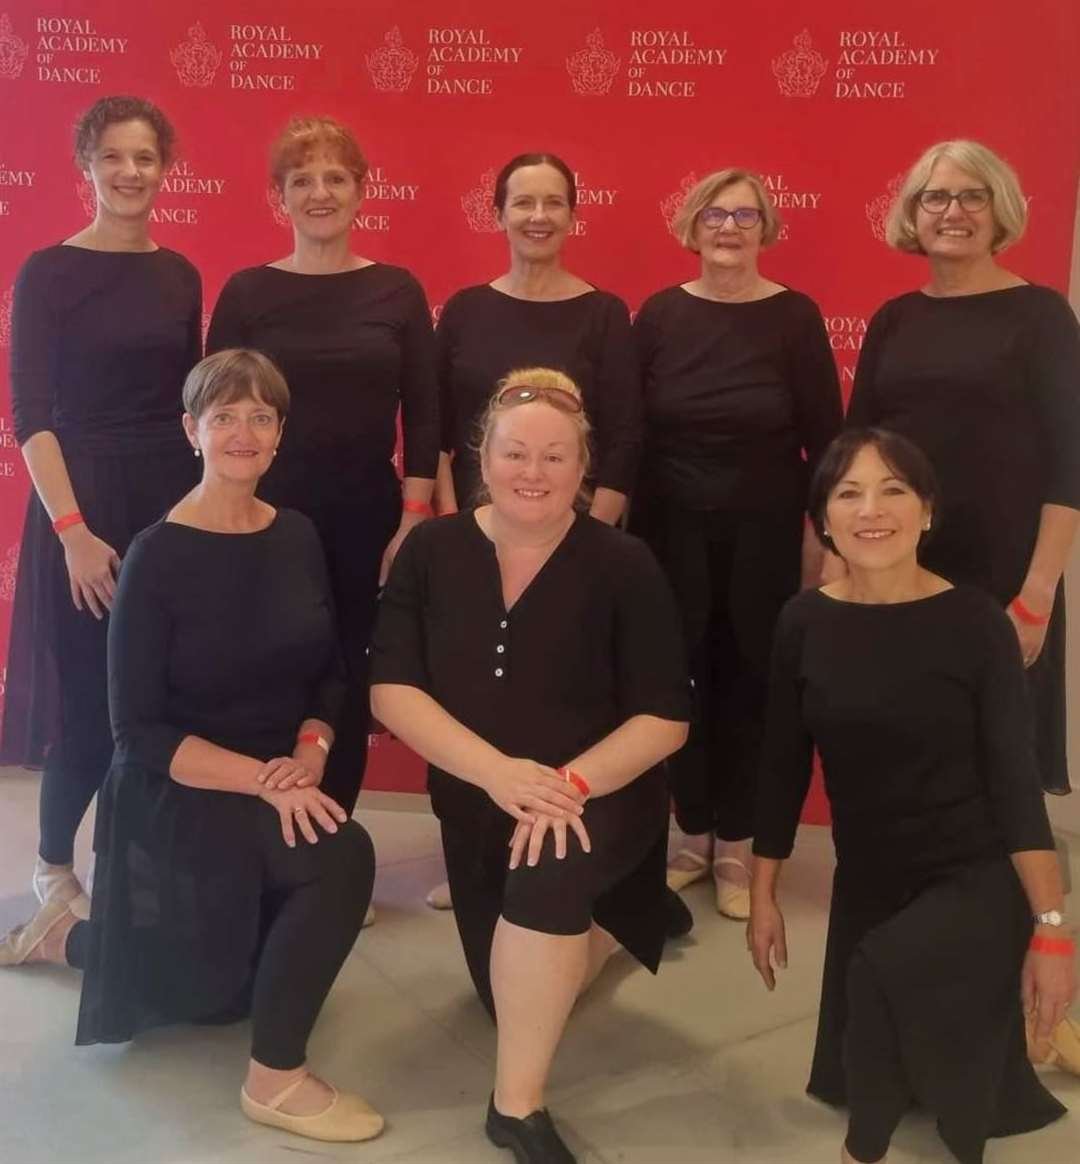 The seven Silver Swans along with their ballet teacher Amy Taylor at the Royal Academy of Dance. | Image: Supplied